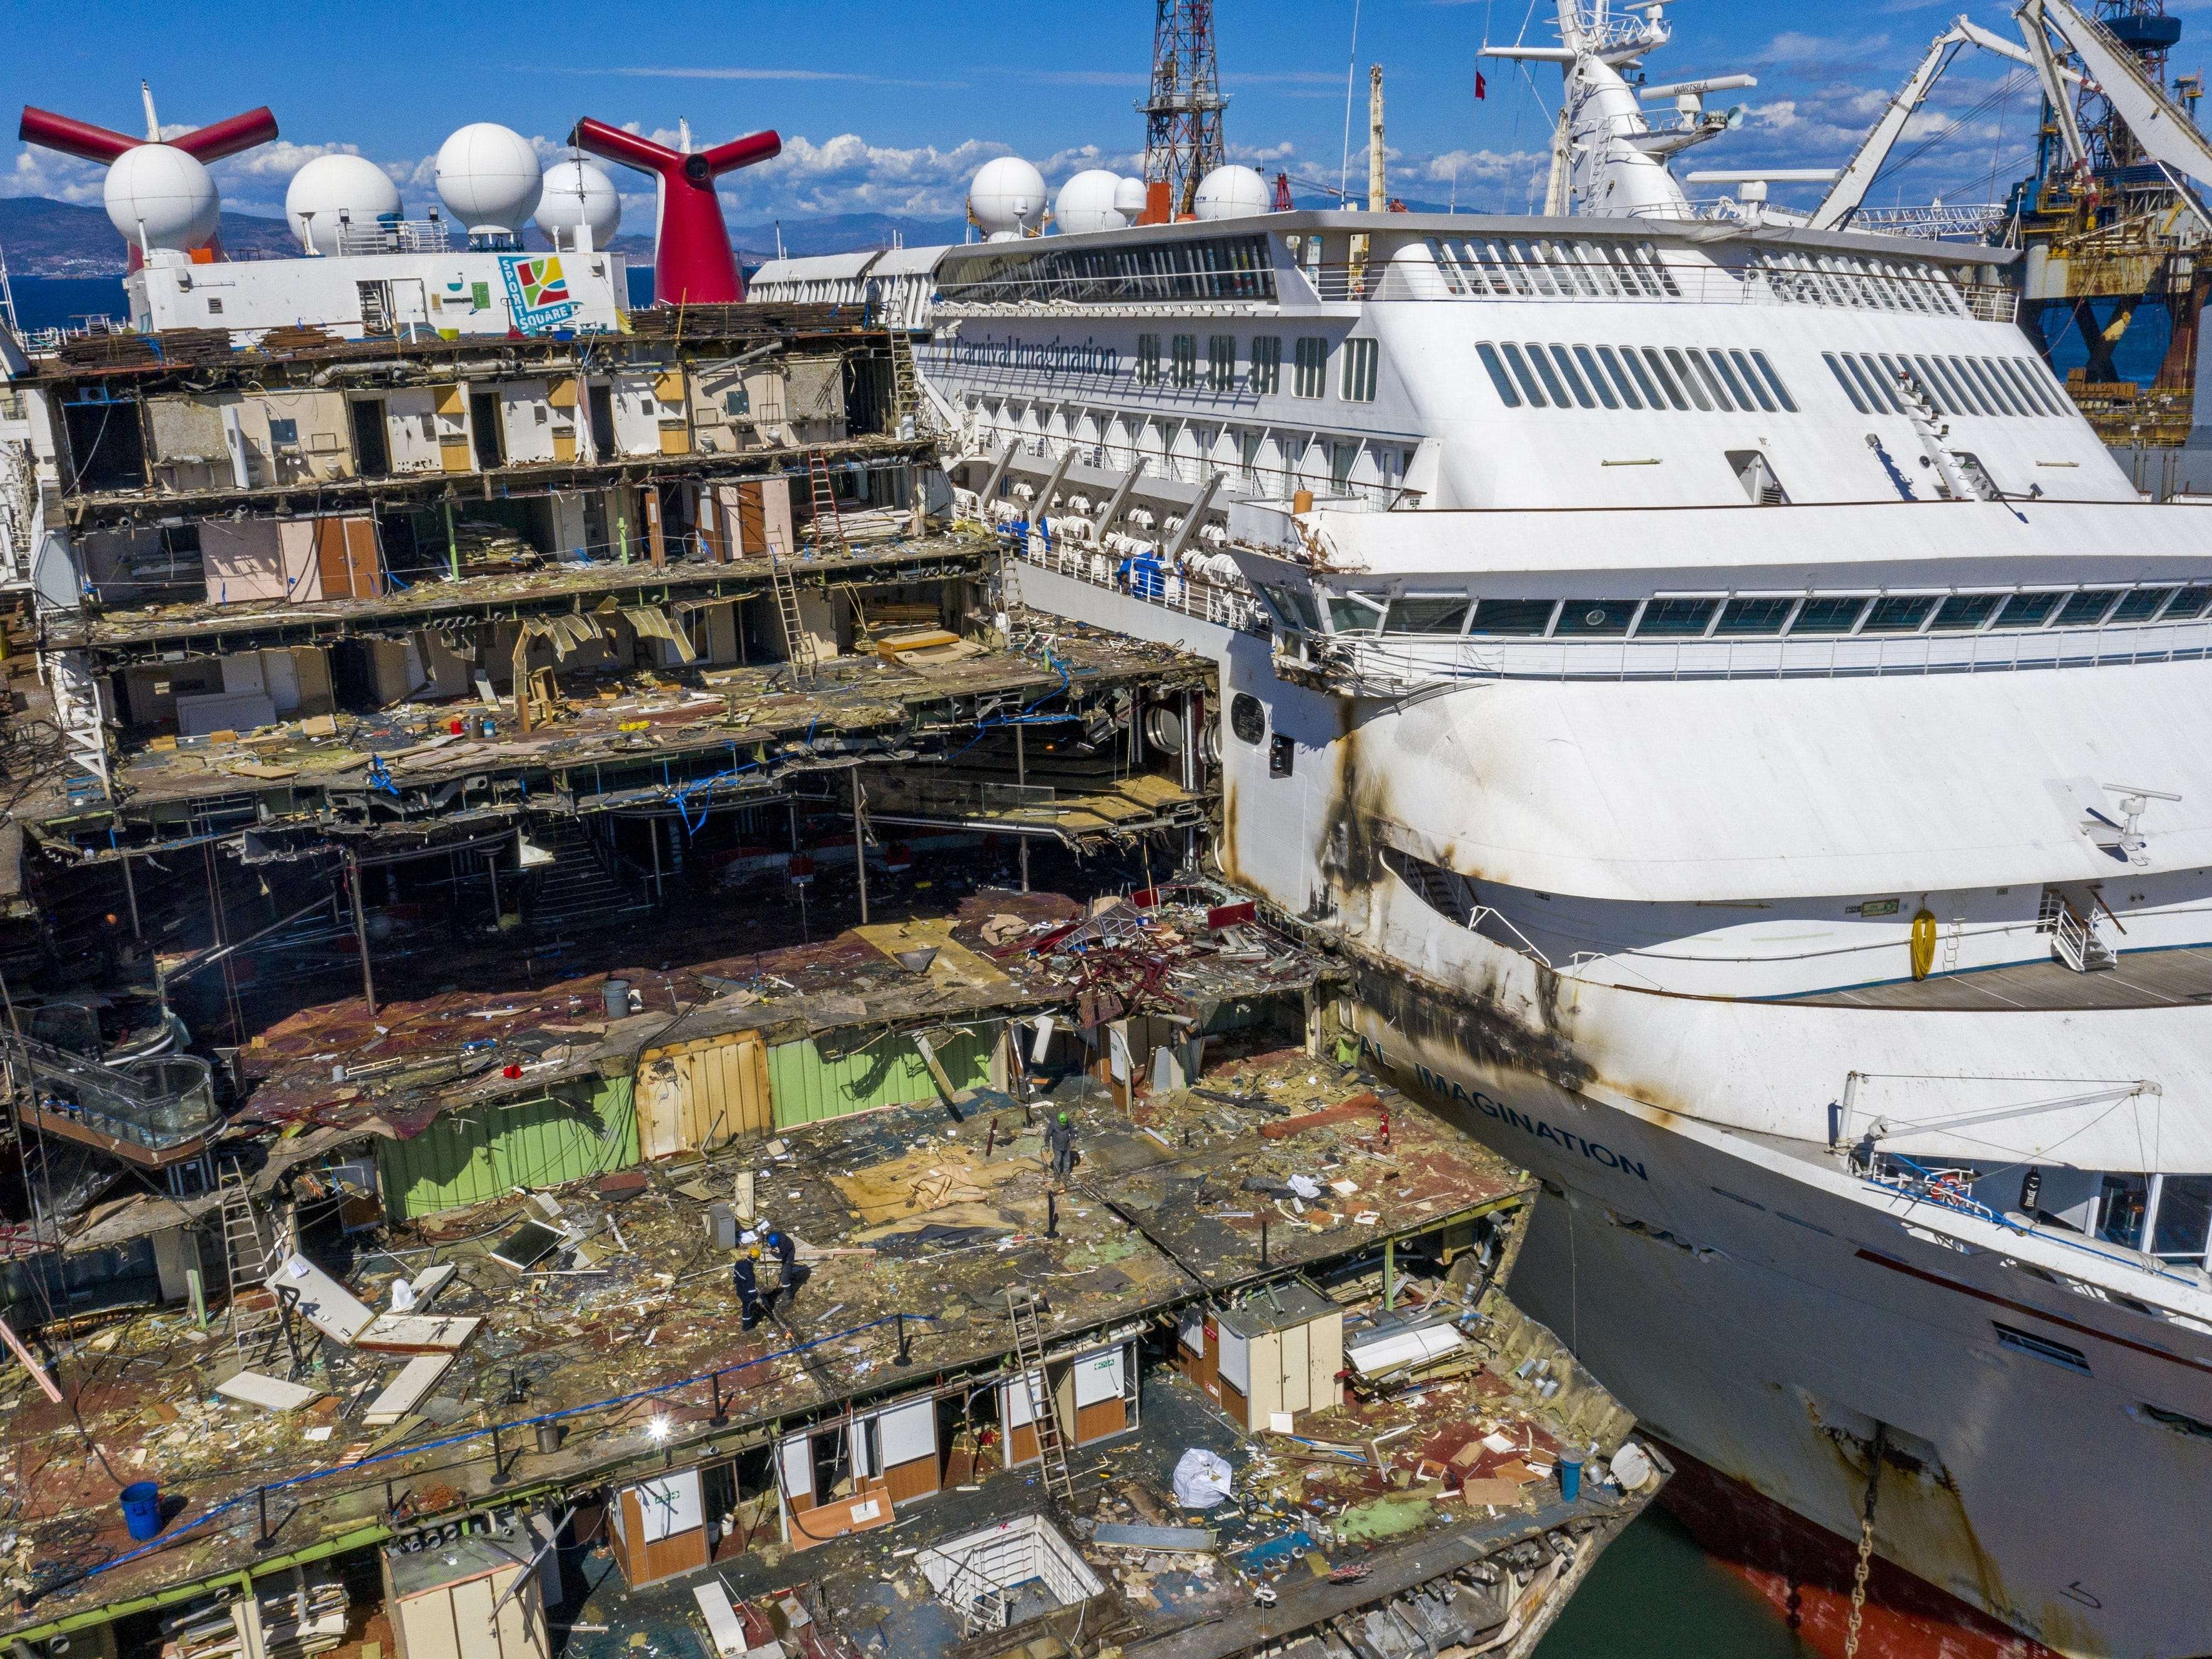 Photos Of Abandoned Stripped Cruise Ships Show How Deeply The Cruise Industry Is Sinking 